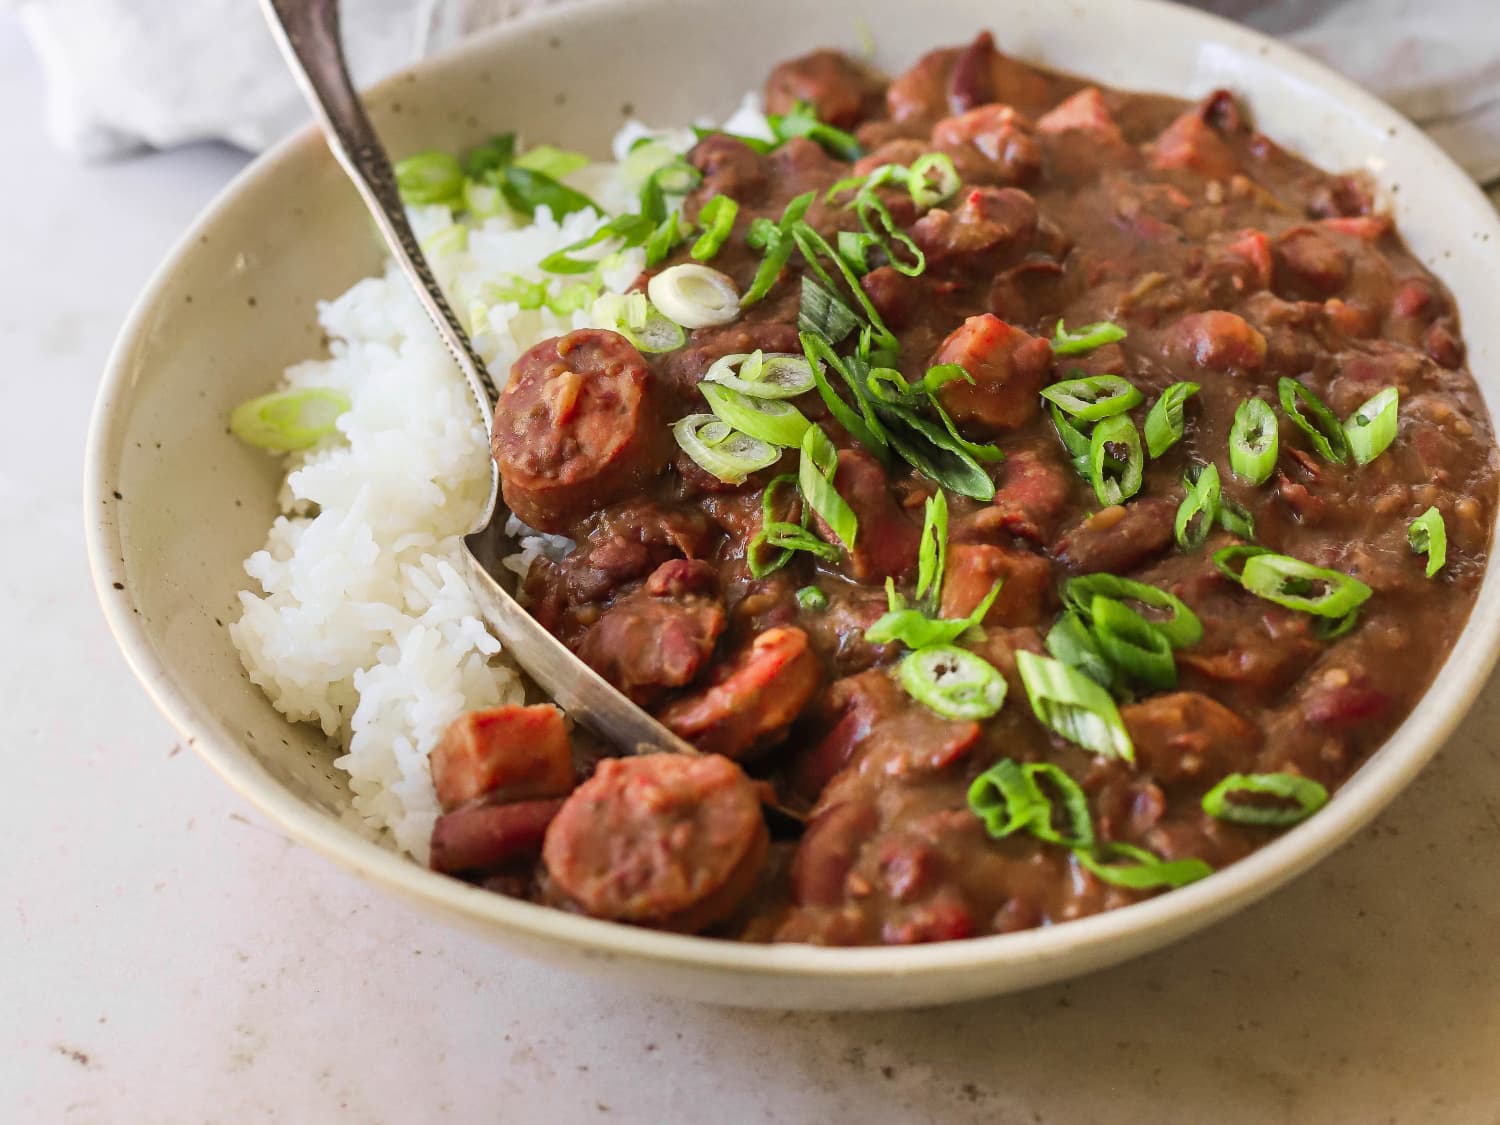 https://cdn.apartmenttherapy.info/image/upload/f_jpg,q_auto:eco,c_fill,g_auto,w_1500,ar_4:3/k%2FEdit%2F2023-01-Instant-Pot-Red-Beans-And-Rice%2FInstant_Pot_Red_Beans_and_Rice-3